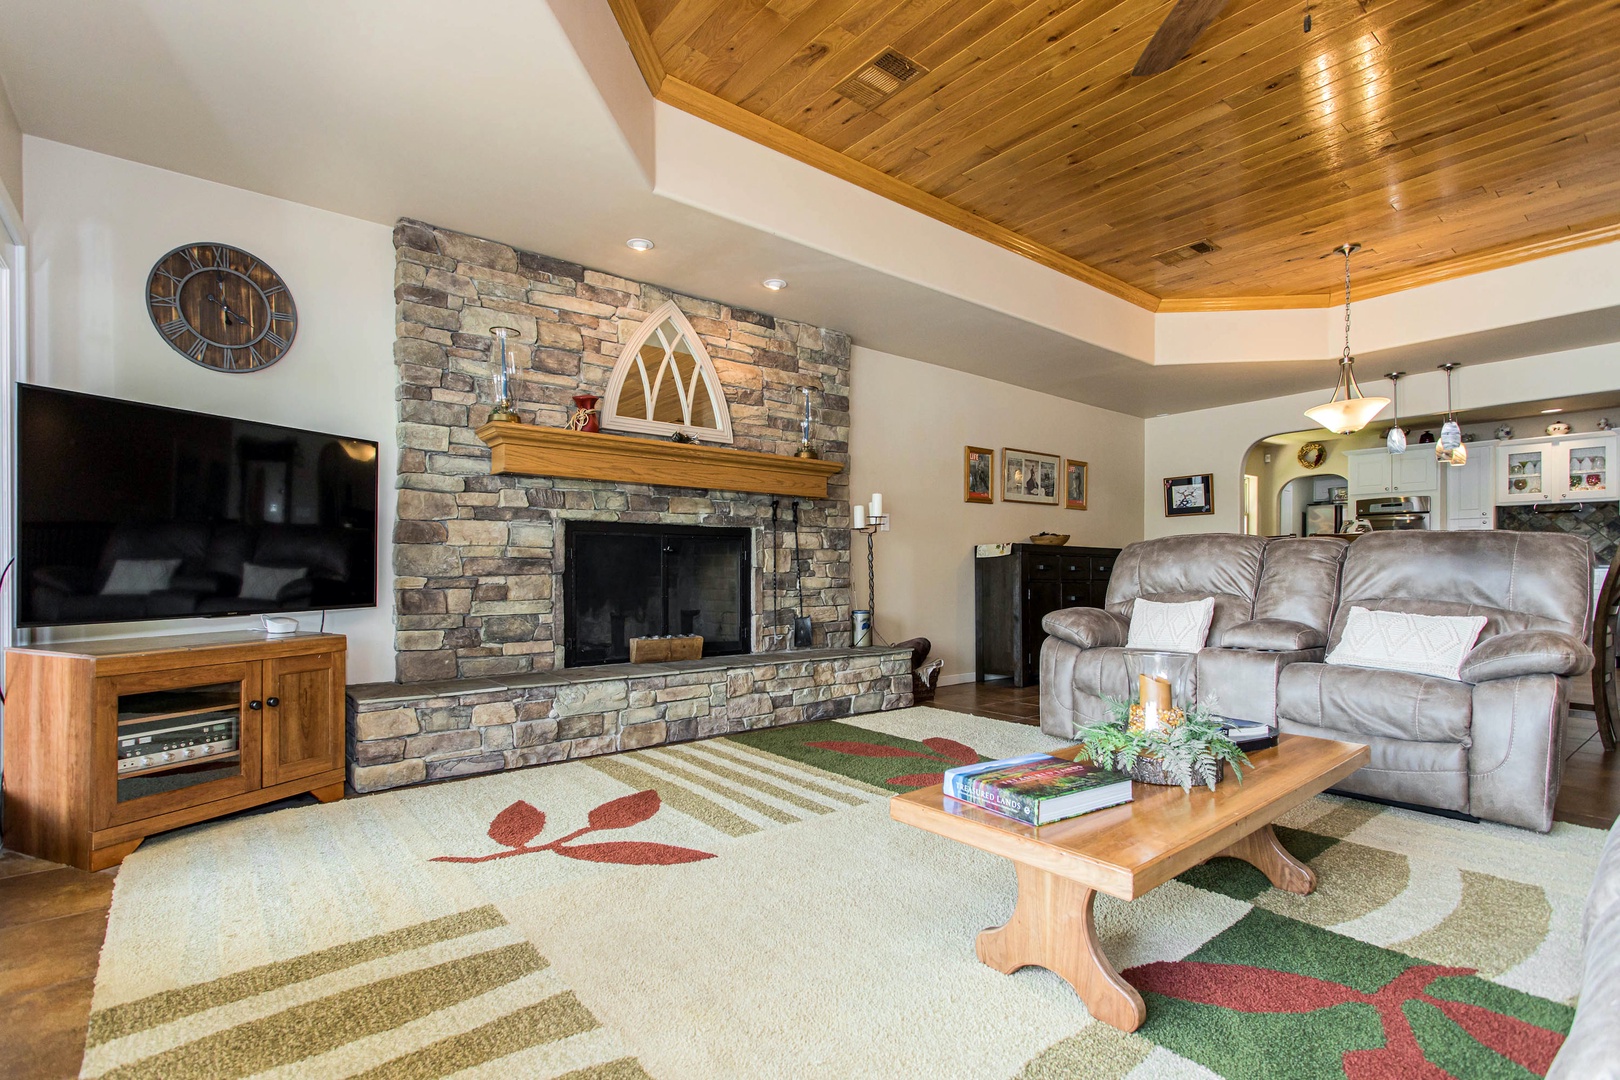 Living room with cable TV, fireplace, and comfortable seating